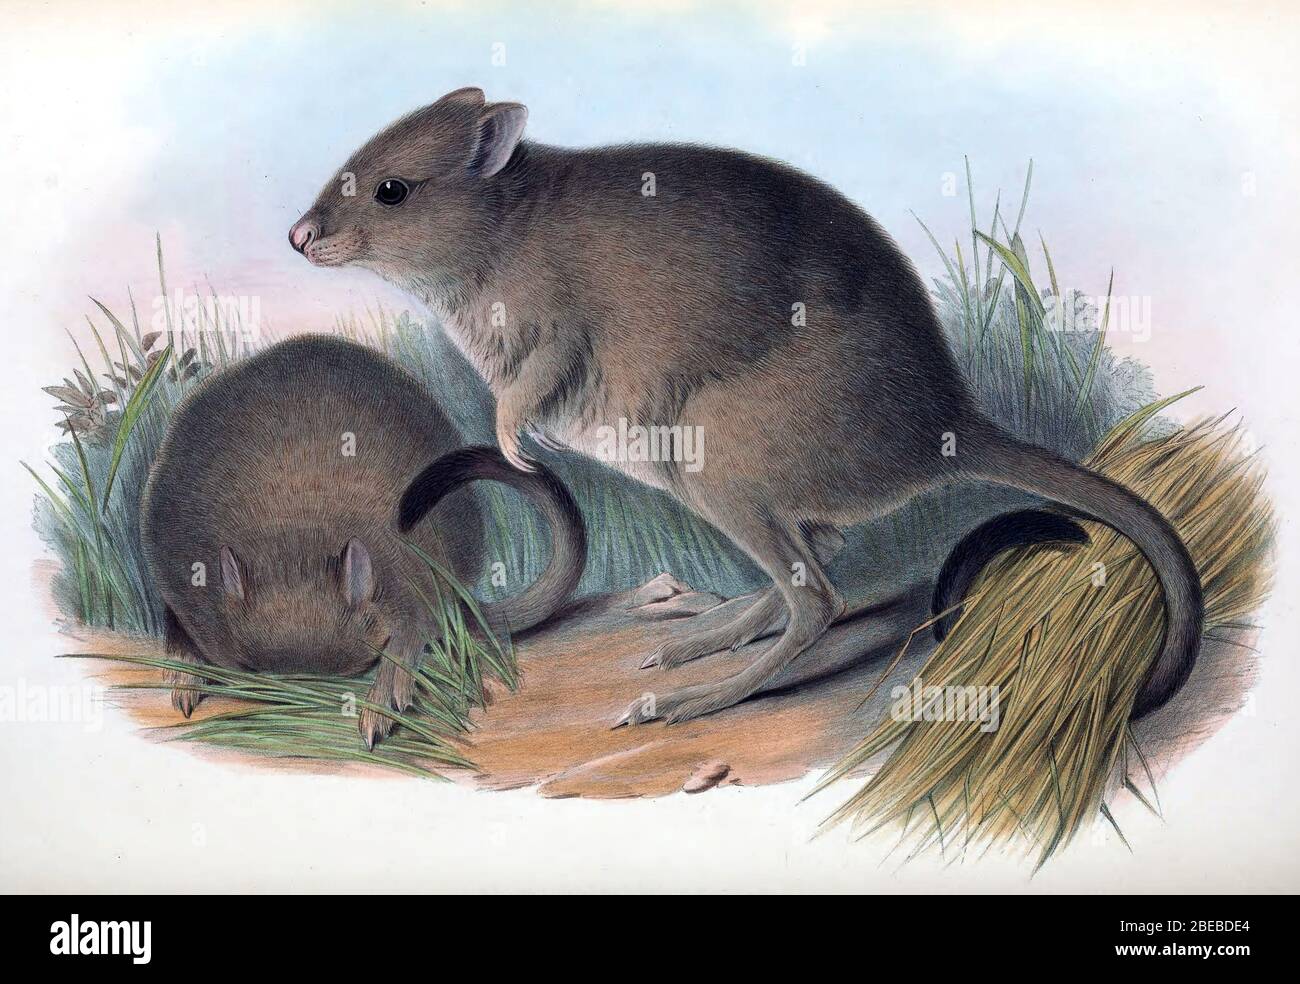 Plate in Gould's Mammals of Australia volume 3. The title is the caption in  that work, and may be a synonym. The file was uploaded with the current  name in the category,